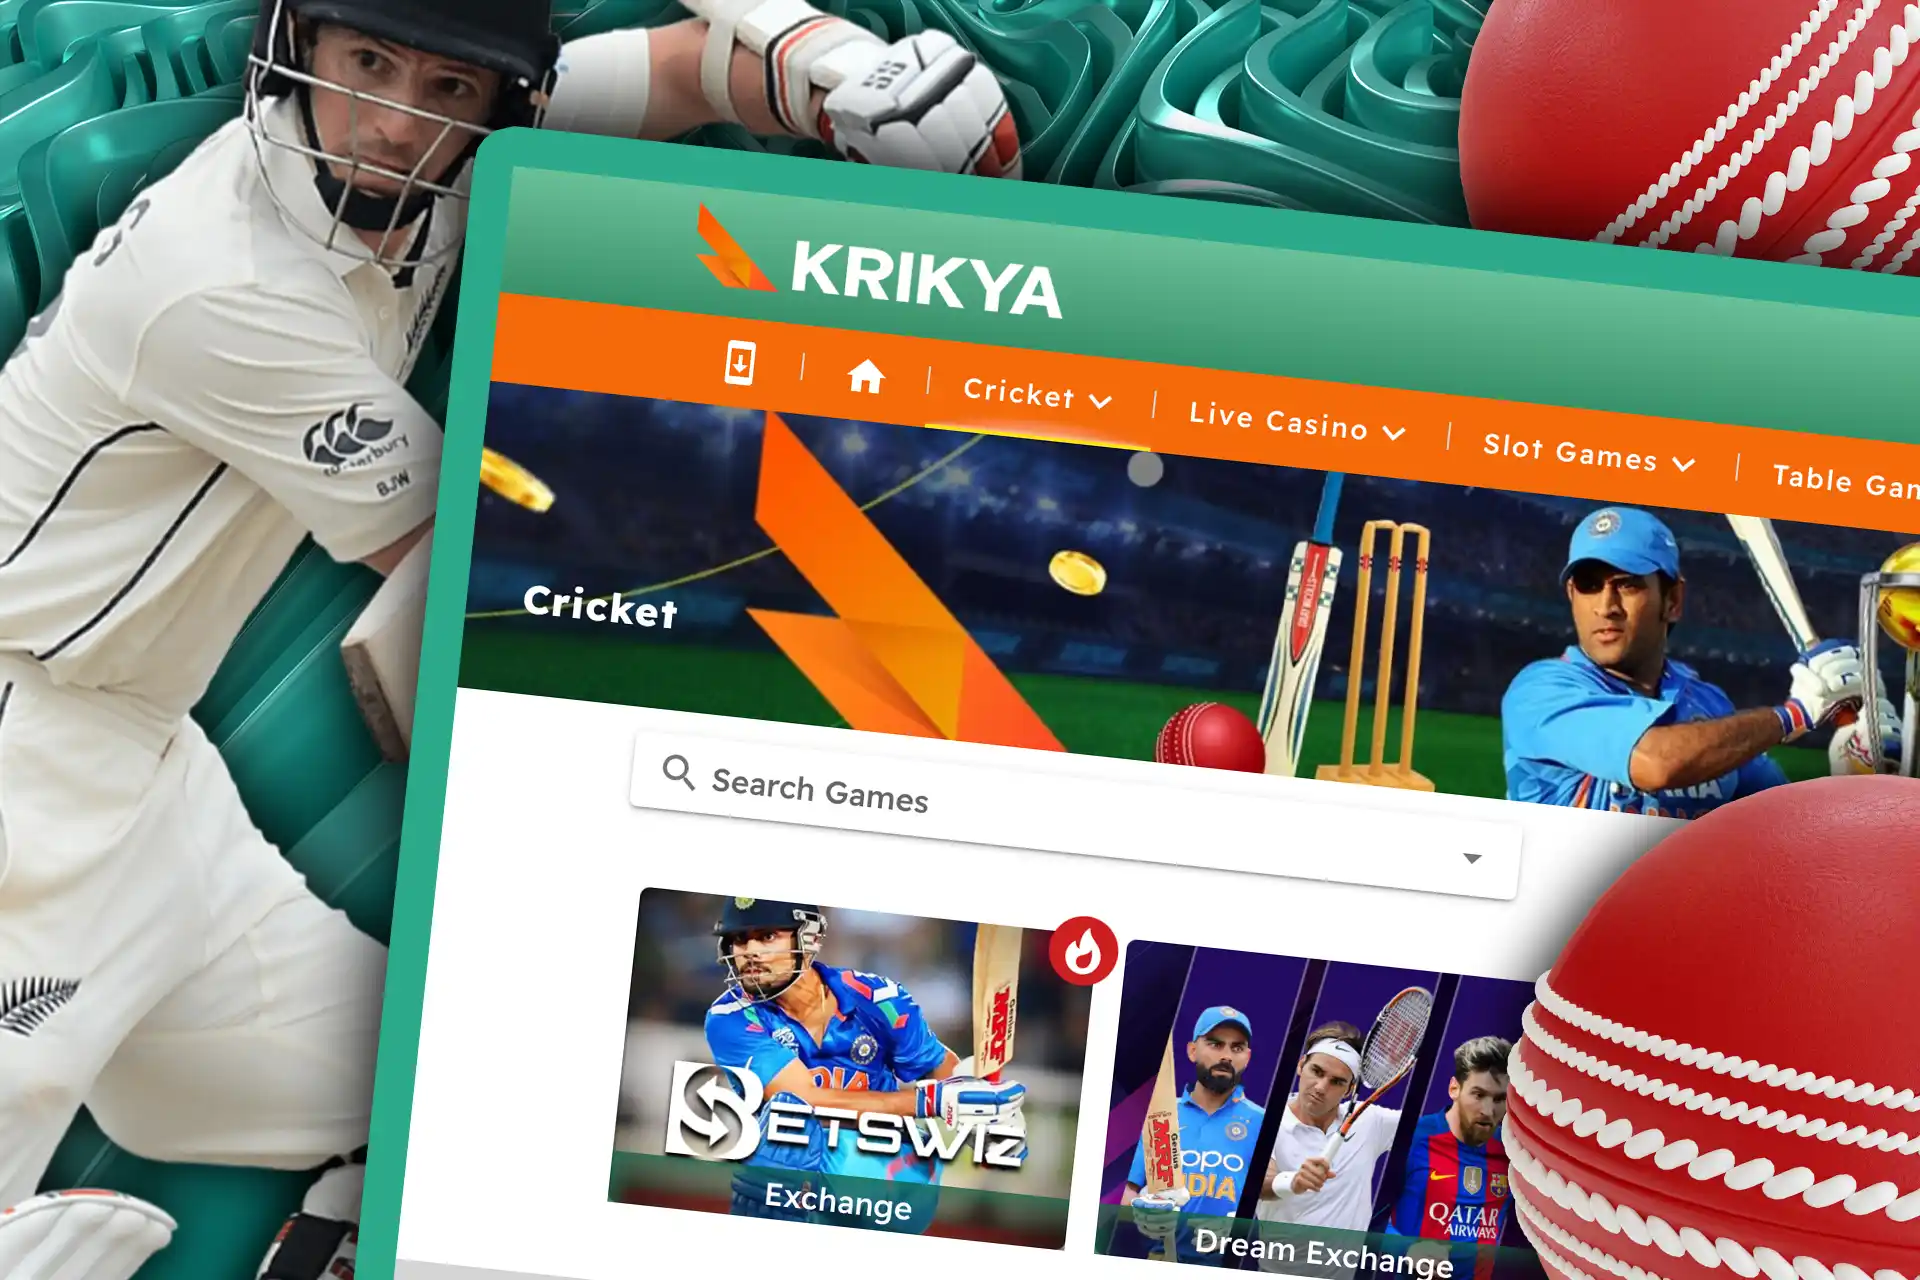 Krikya is a great site for betting on cricket.